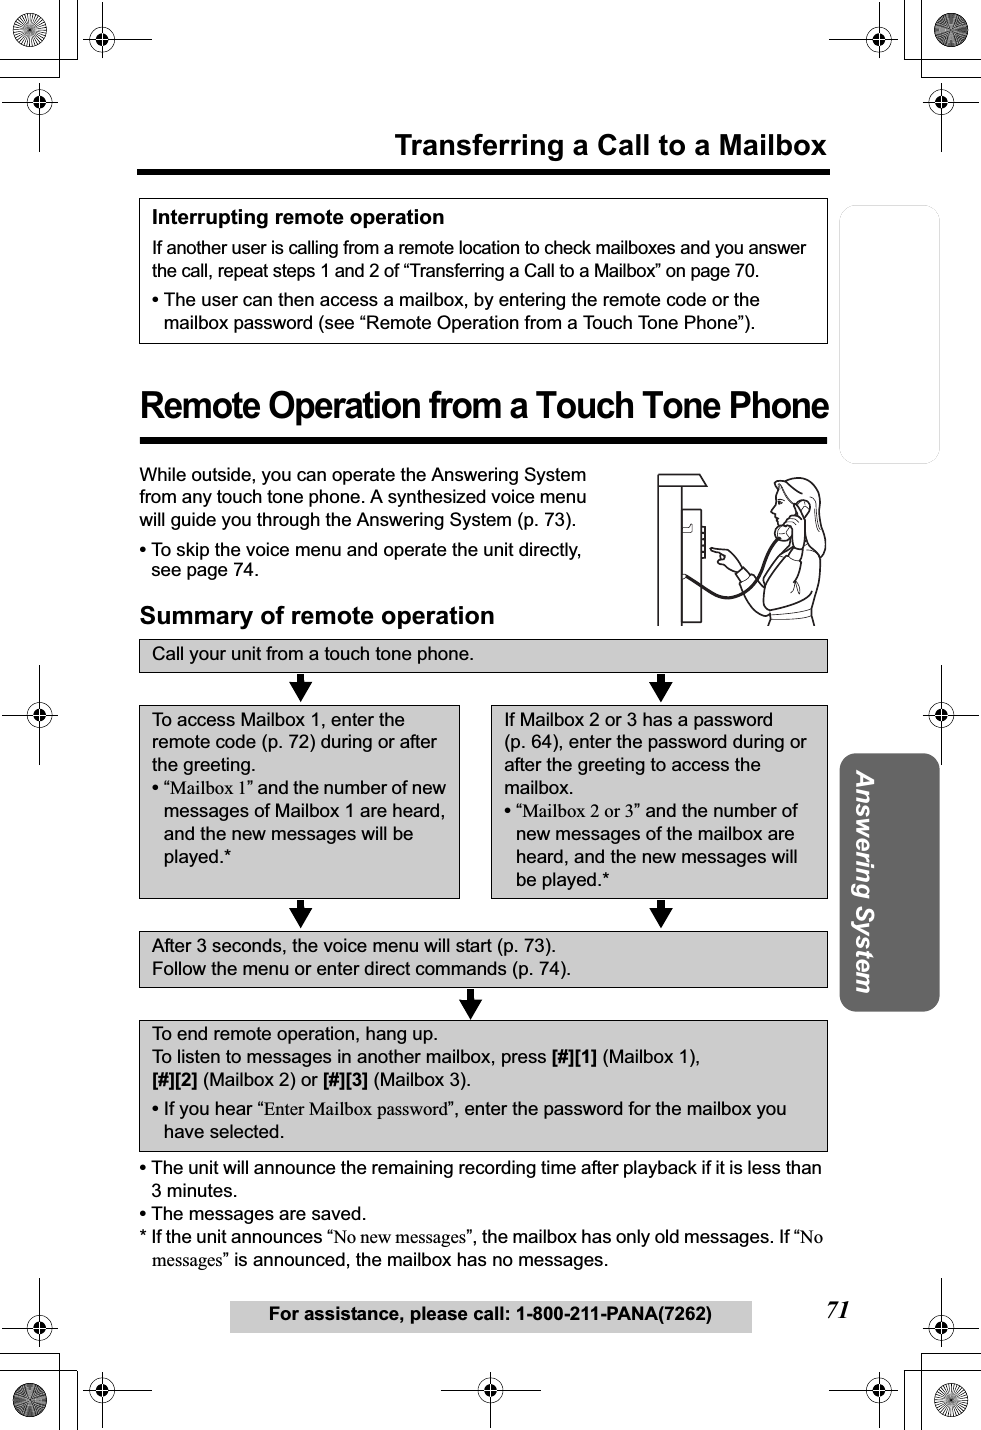 Telephone System Useful InformationAnswering SystemPreparation71For assistance, please call: 1-800-211-PANA(7262)Transferring a Call to a MailboxRemote Operation from a Touch Tone PhoneWhile outside, you can operate the Answering System from any touch tone phone. A synthesized voice menu will guide you through the Answering System (p. 73).•To skip the voice menu and operate the unit directly, see page 74.Summary of remote operation•The unit will announce the remaining recording time after playback if it is less than 3 minutes.•The messages are saved.* If the unit announces “No new messages”, the mailbox has only old messages. If “Nomessages” is announced, the mailbox has no messages.Interrupting remote operationIf another user is calling from a remote location to check mailboxes and you answer the call, repeat steps 1 and 2 of “Transferring a Call to a Mailbox” on page 70.•The user can then access a mailbox, by entering the remote code or the mailbox password (see “Remote Operation from a Touch Tone Phone”).Call your unit from a touch tone phone.To access Mailbox 1, enter the remote code (p. 72) during or after the greeting.•“Mailbox 1” and the number of new messages of Mailbox 1 are heard, and the new messages will be played.*If Mailbox 2 or 3 has a password (p. 64), enter the password during or after the greeting to access the mailbox.•“Mailbox 2 or 3” and the number of new messages of the mailbox are heard, and the new messages will be played.*After 3 seconds, the voice menu will start (p. 73).Follow the menu or enter direct commands (p. 74).To end remote operation, hang up.To listen to messages in another mailbox, press [#][1] (Mailbox 1), [#][2] (Mailbox 2) or [#][3] (Mailbox 3).•If you hear “Enter Mailbox password”, enter the password for the mailbox you have selected.